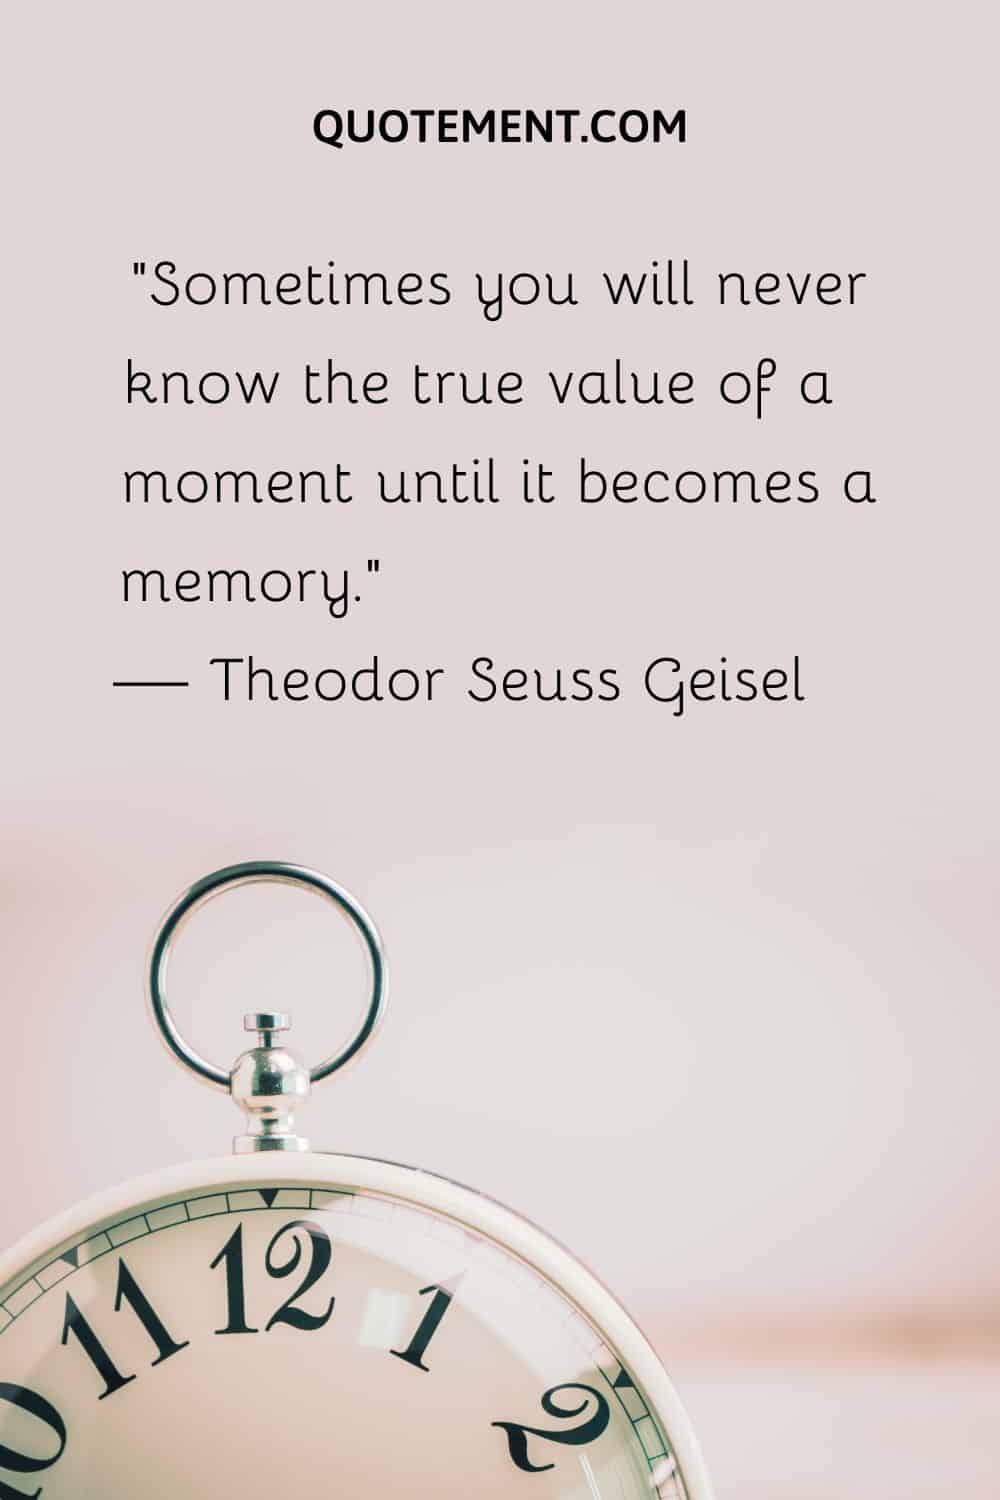 Sometimes you will never know the true value of a moment until it becomes a memory.